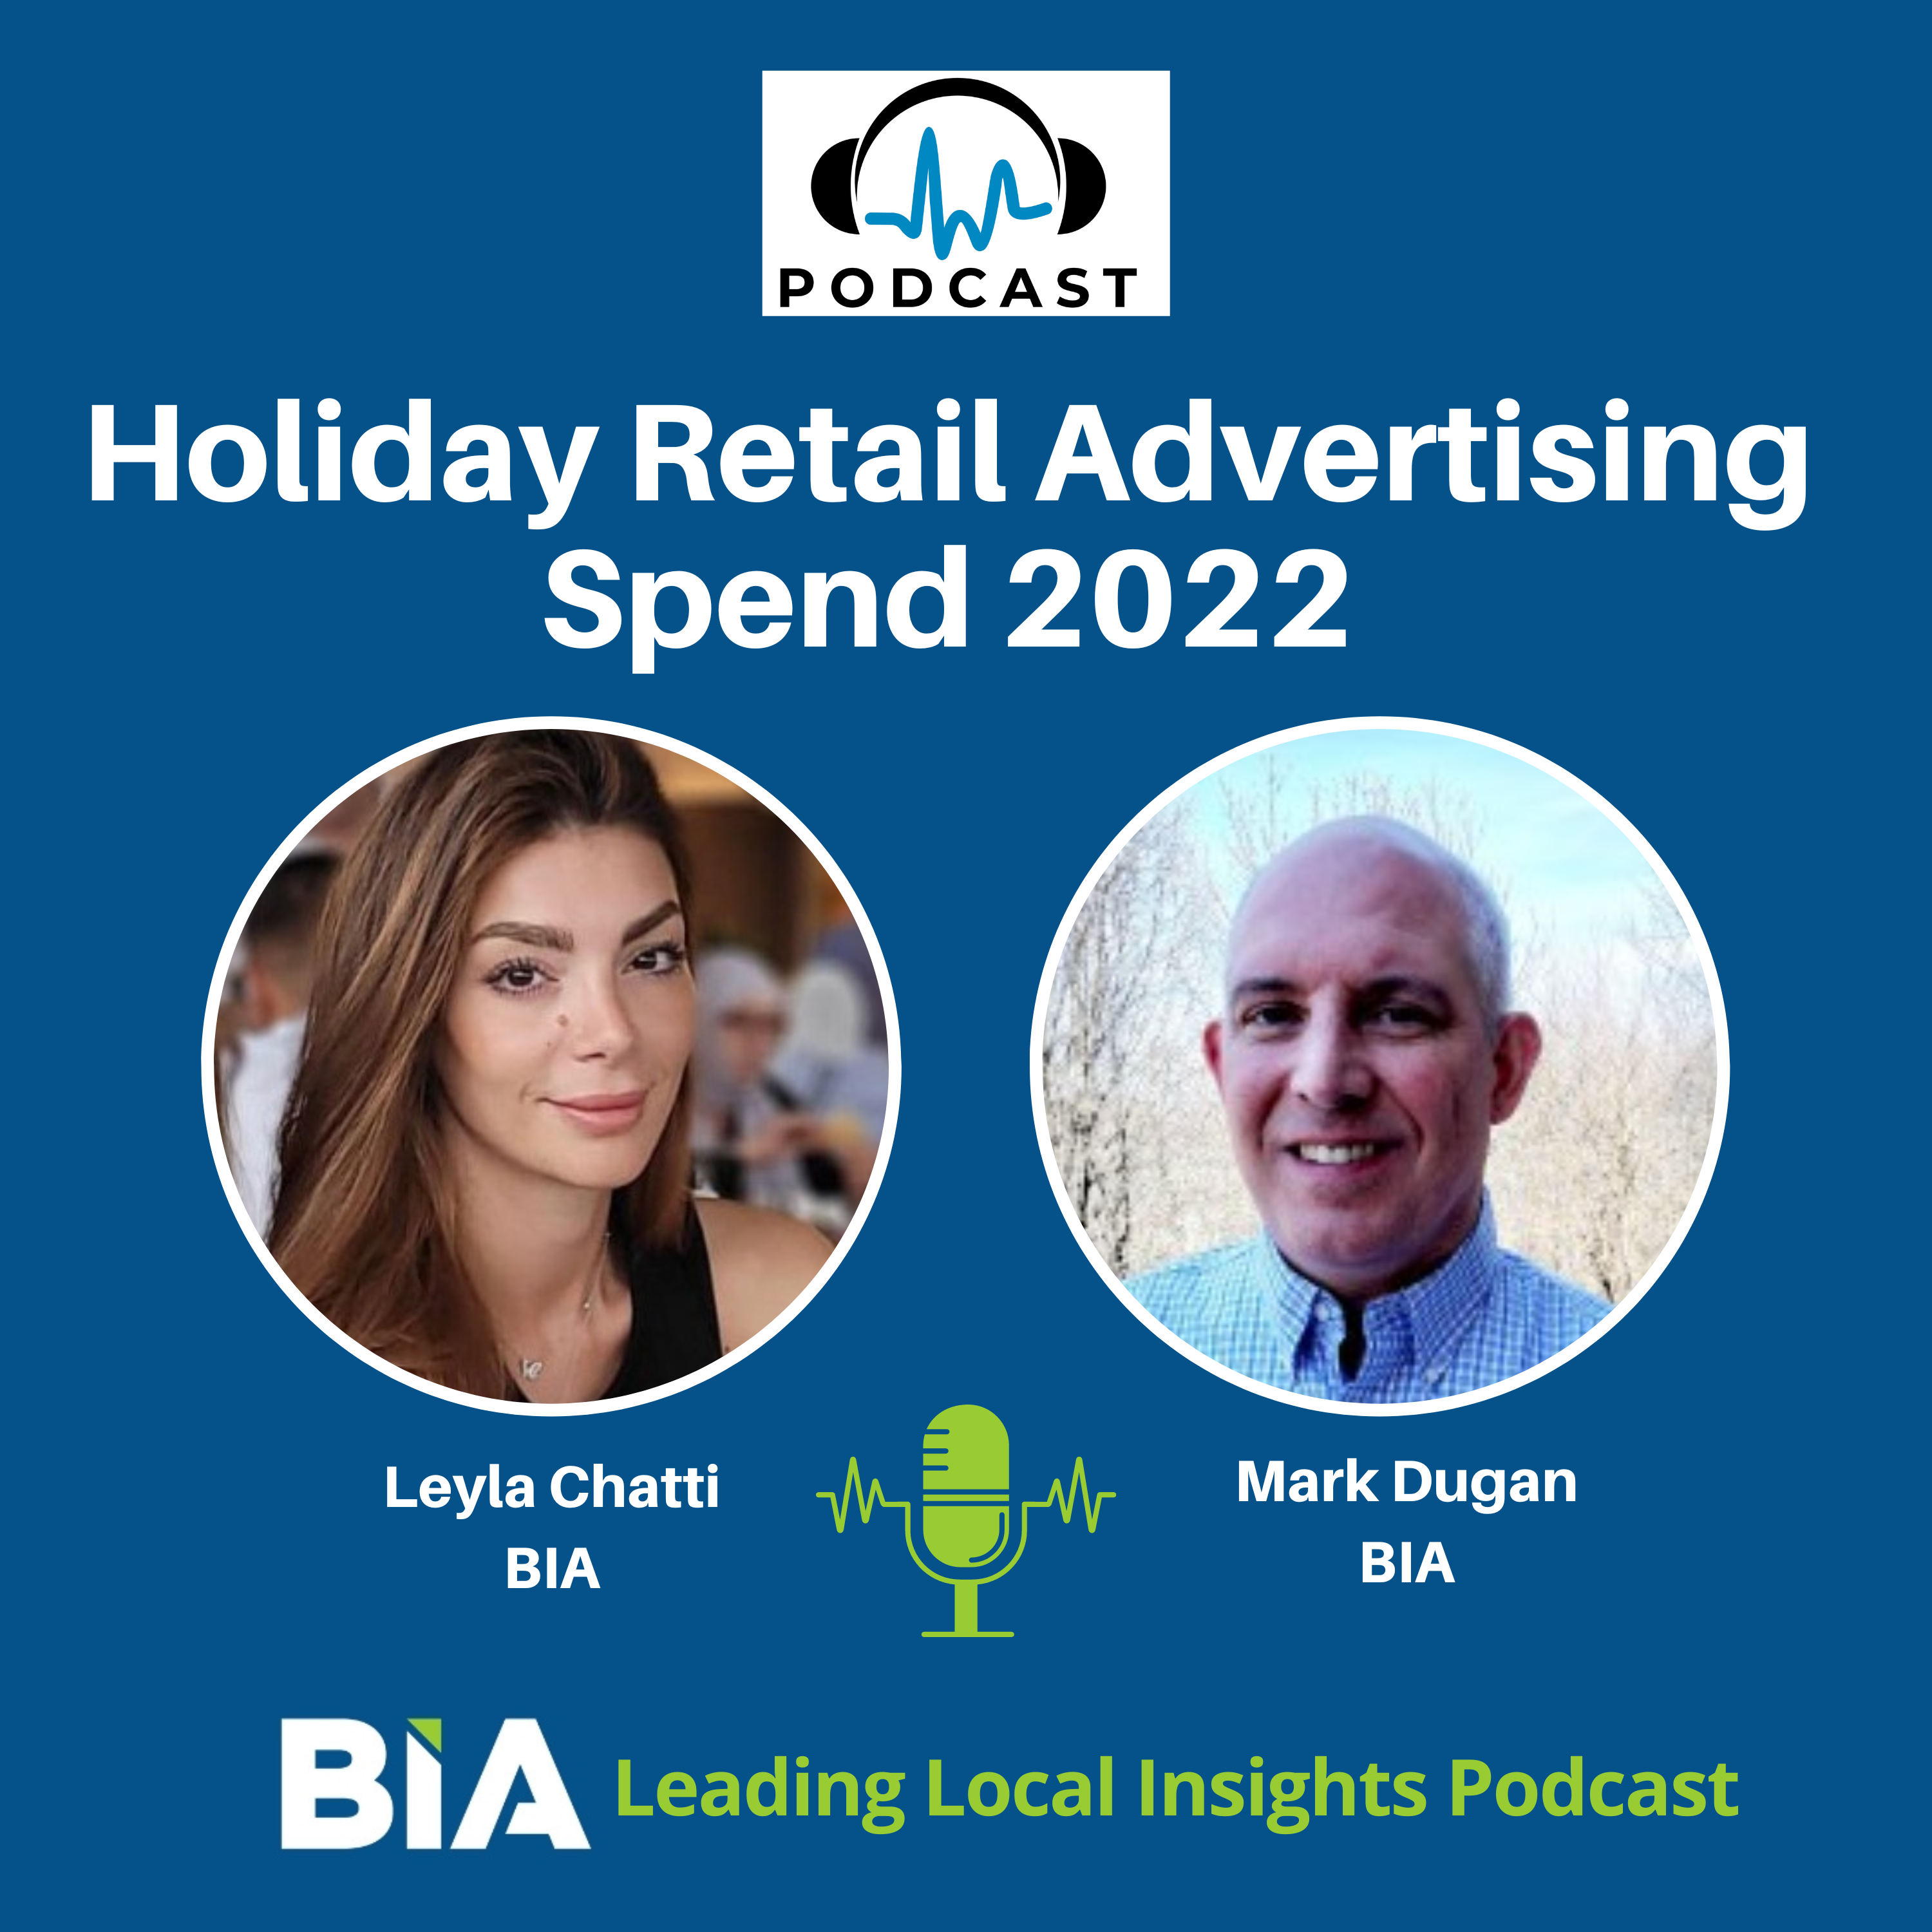 Leading Local Insights Podcast: Holiday Retail Advertising Spend 2022